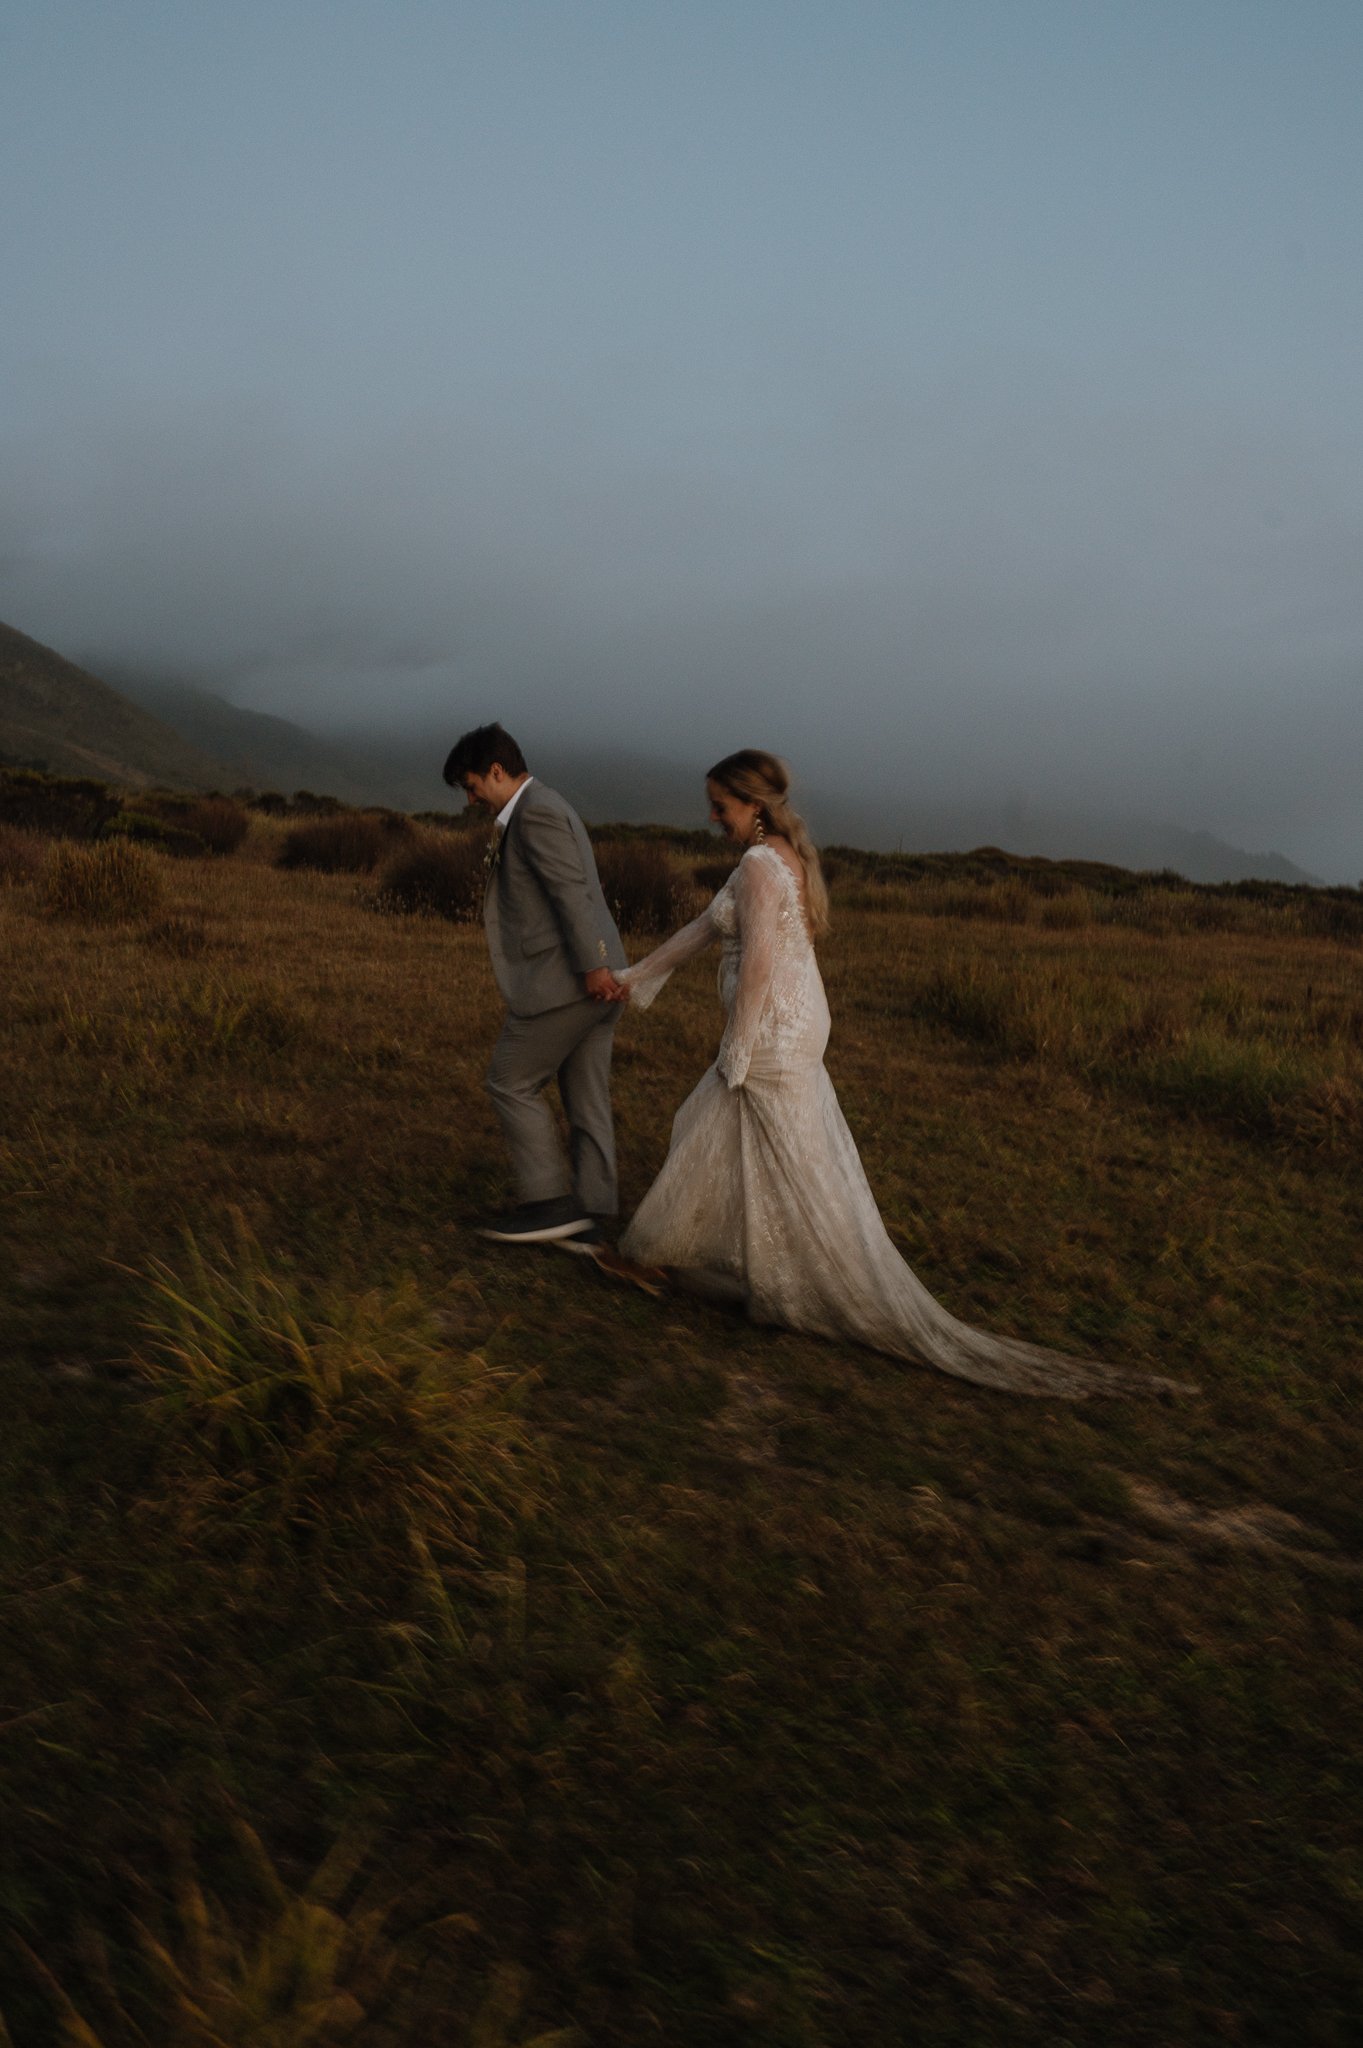 Big Sur Ventana wedding bride and groom walking holding hands up a hilly area through the grass